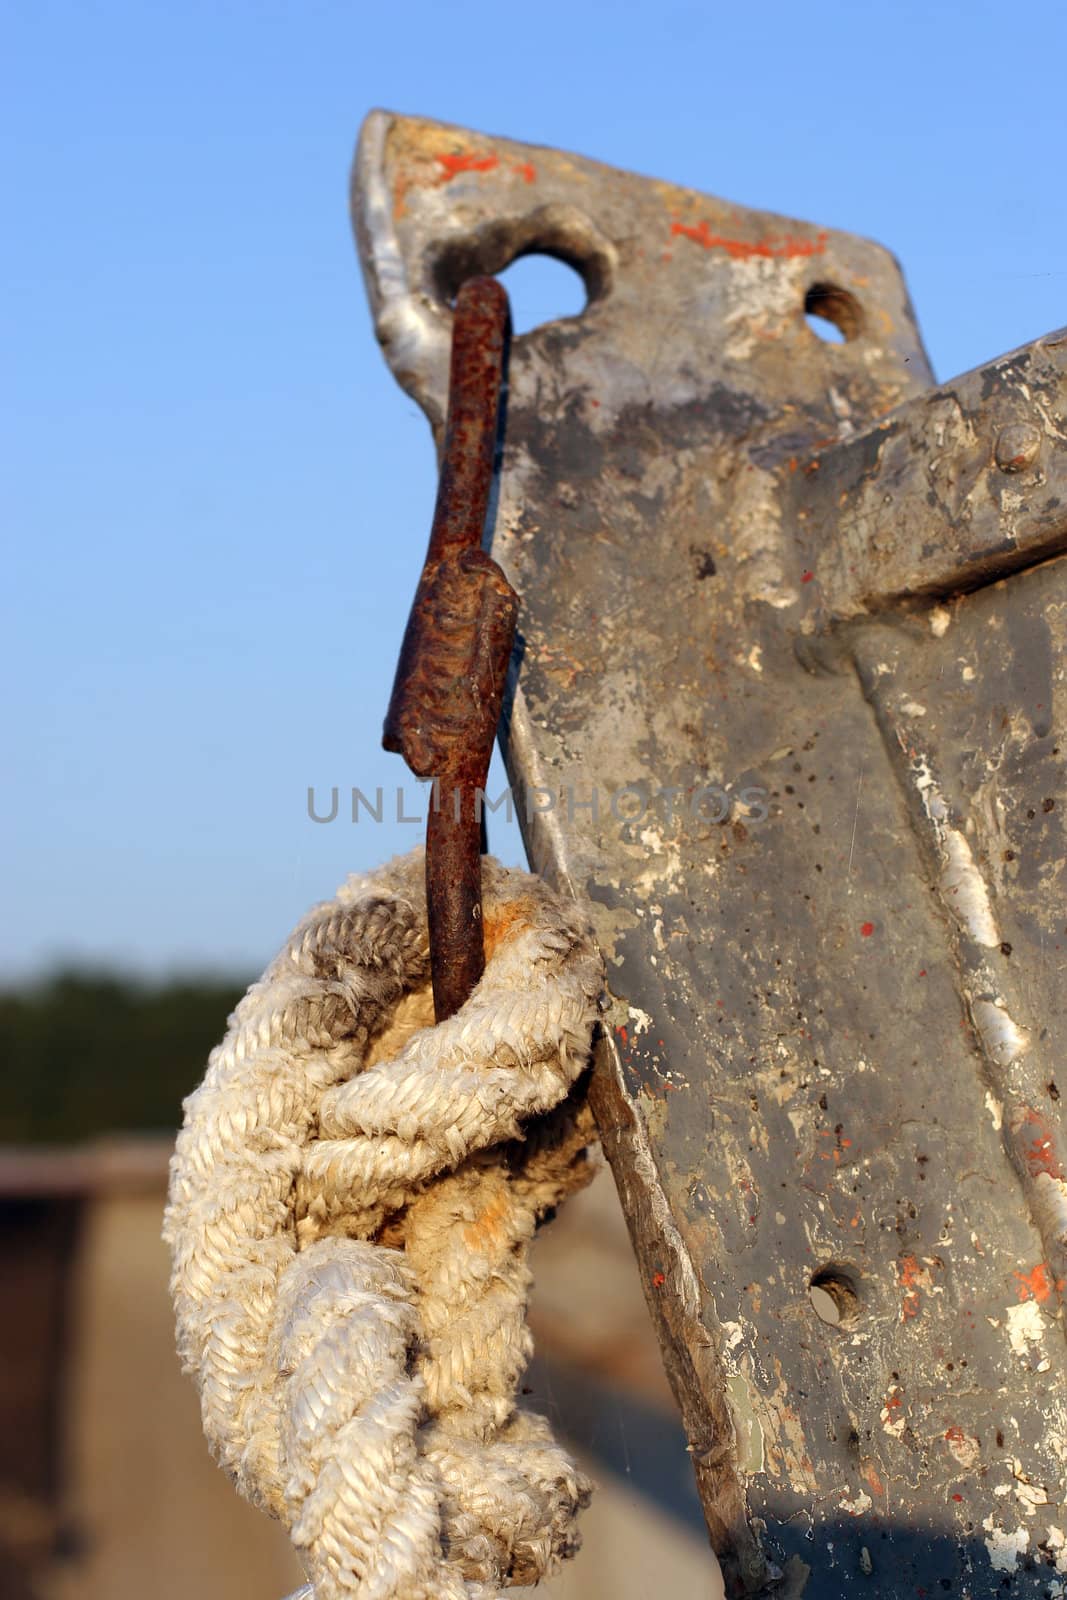 bend of old rope of the bow of the old rusty boat (marine knot). Close up